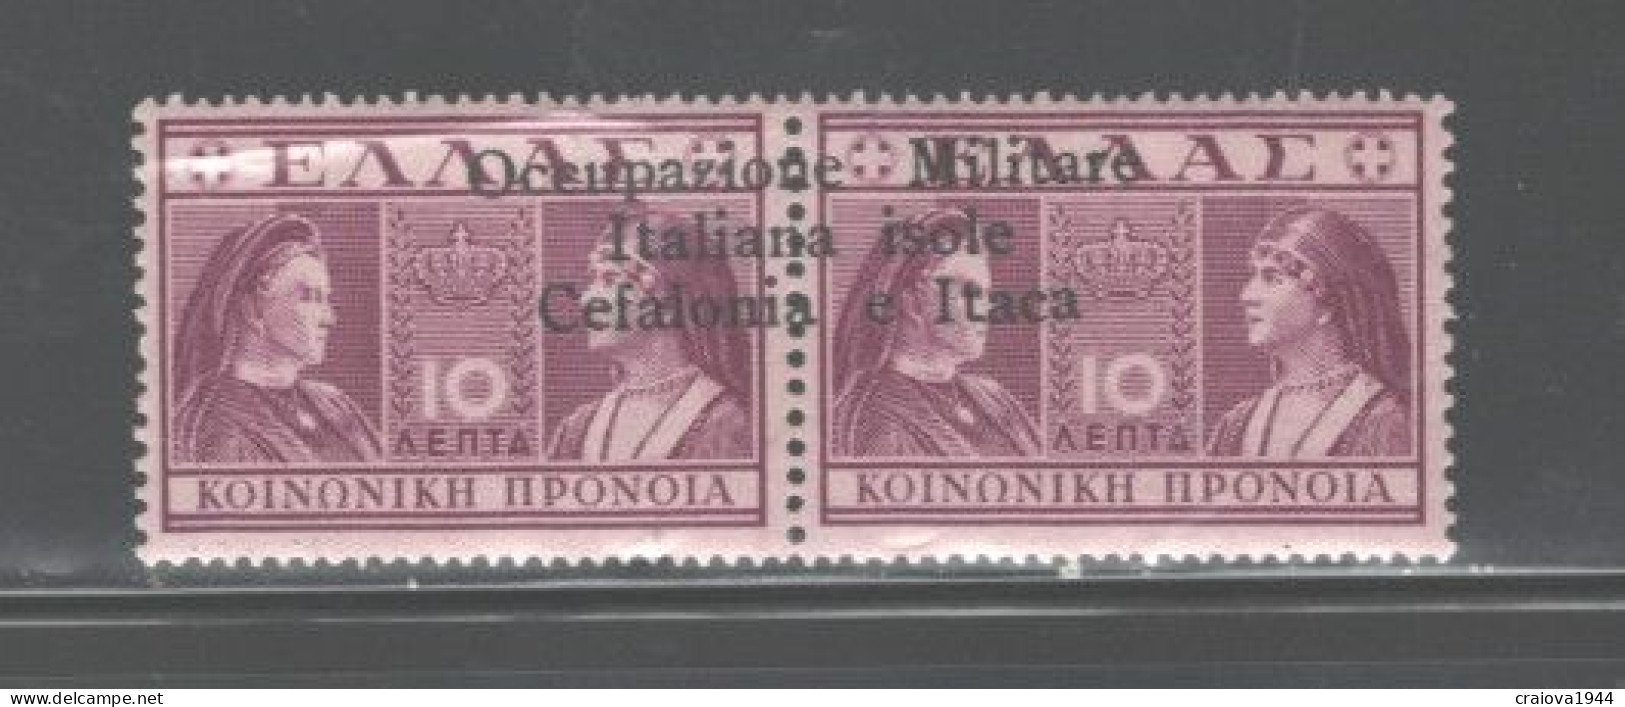 GREECE,1941"ISSUE FOR CEPHALONIA & ITHACA"#NR2a,Horz.OVPT. MNH, CERT. - Ionische Inseln